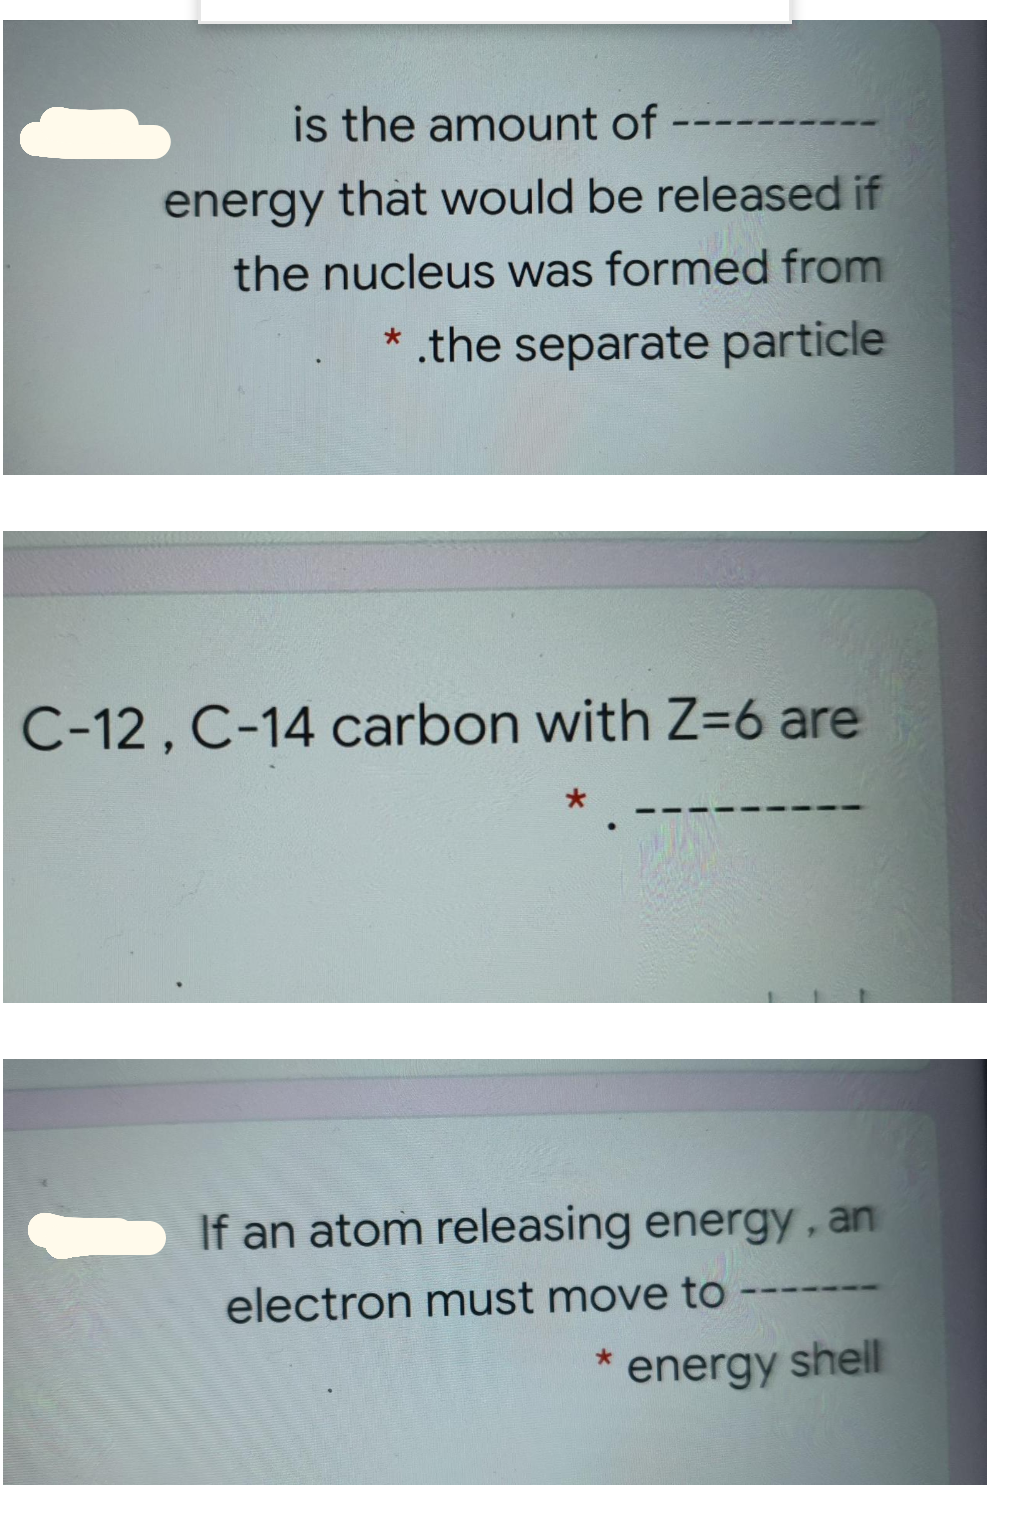 is the amount of
---
energy that would be released if
the nucleus was formed from
* .the separate particle
C-12, C-14 carbon with Z=6 are
If an atom releasing energy, an
electron must move to
energy shell
